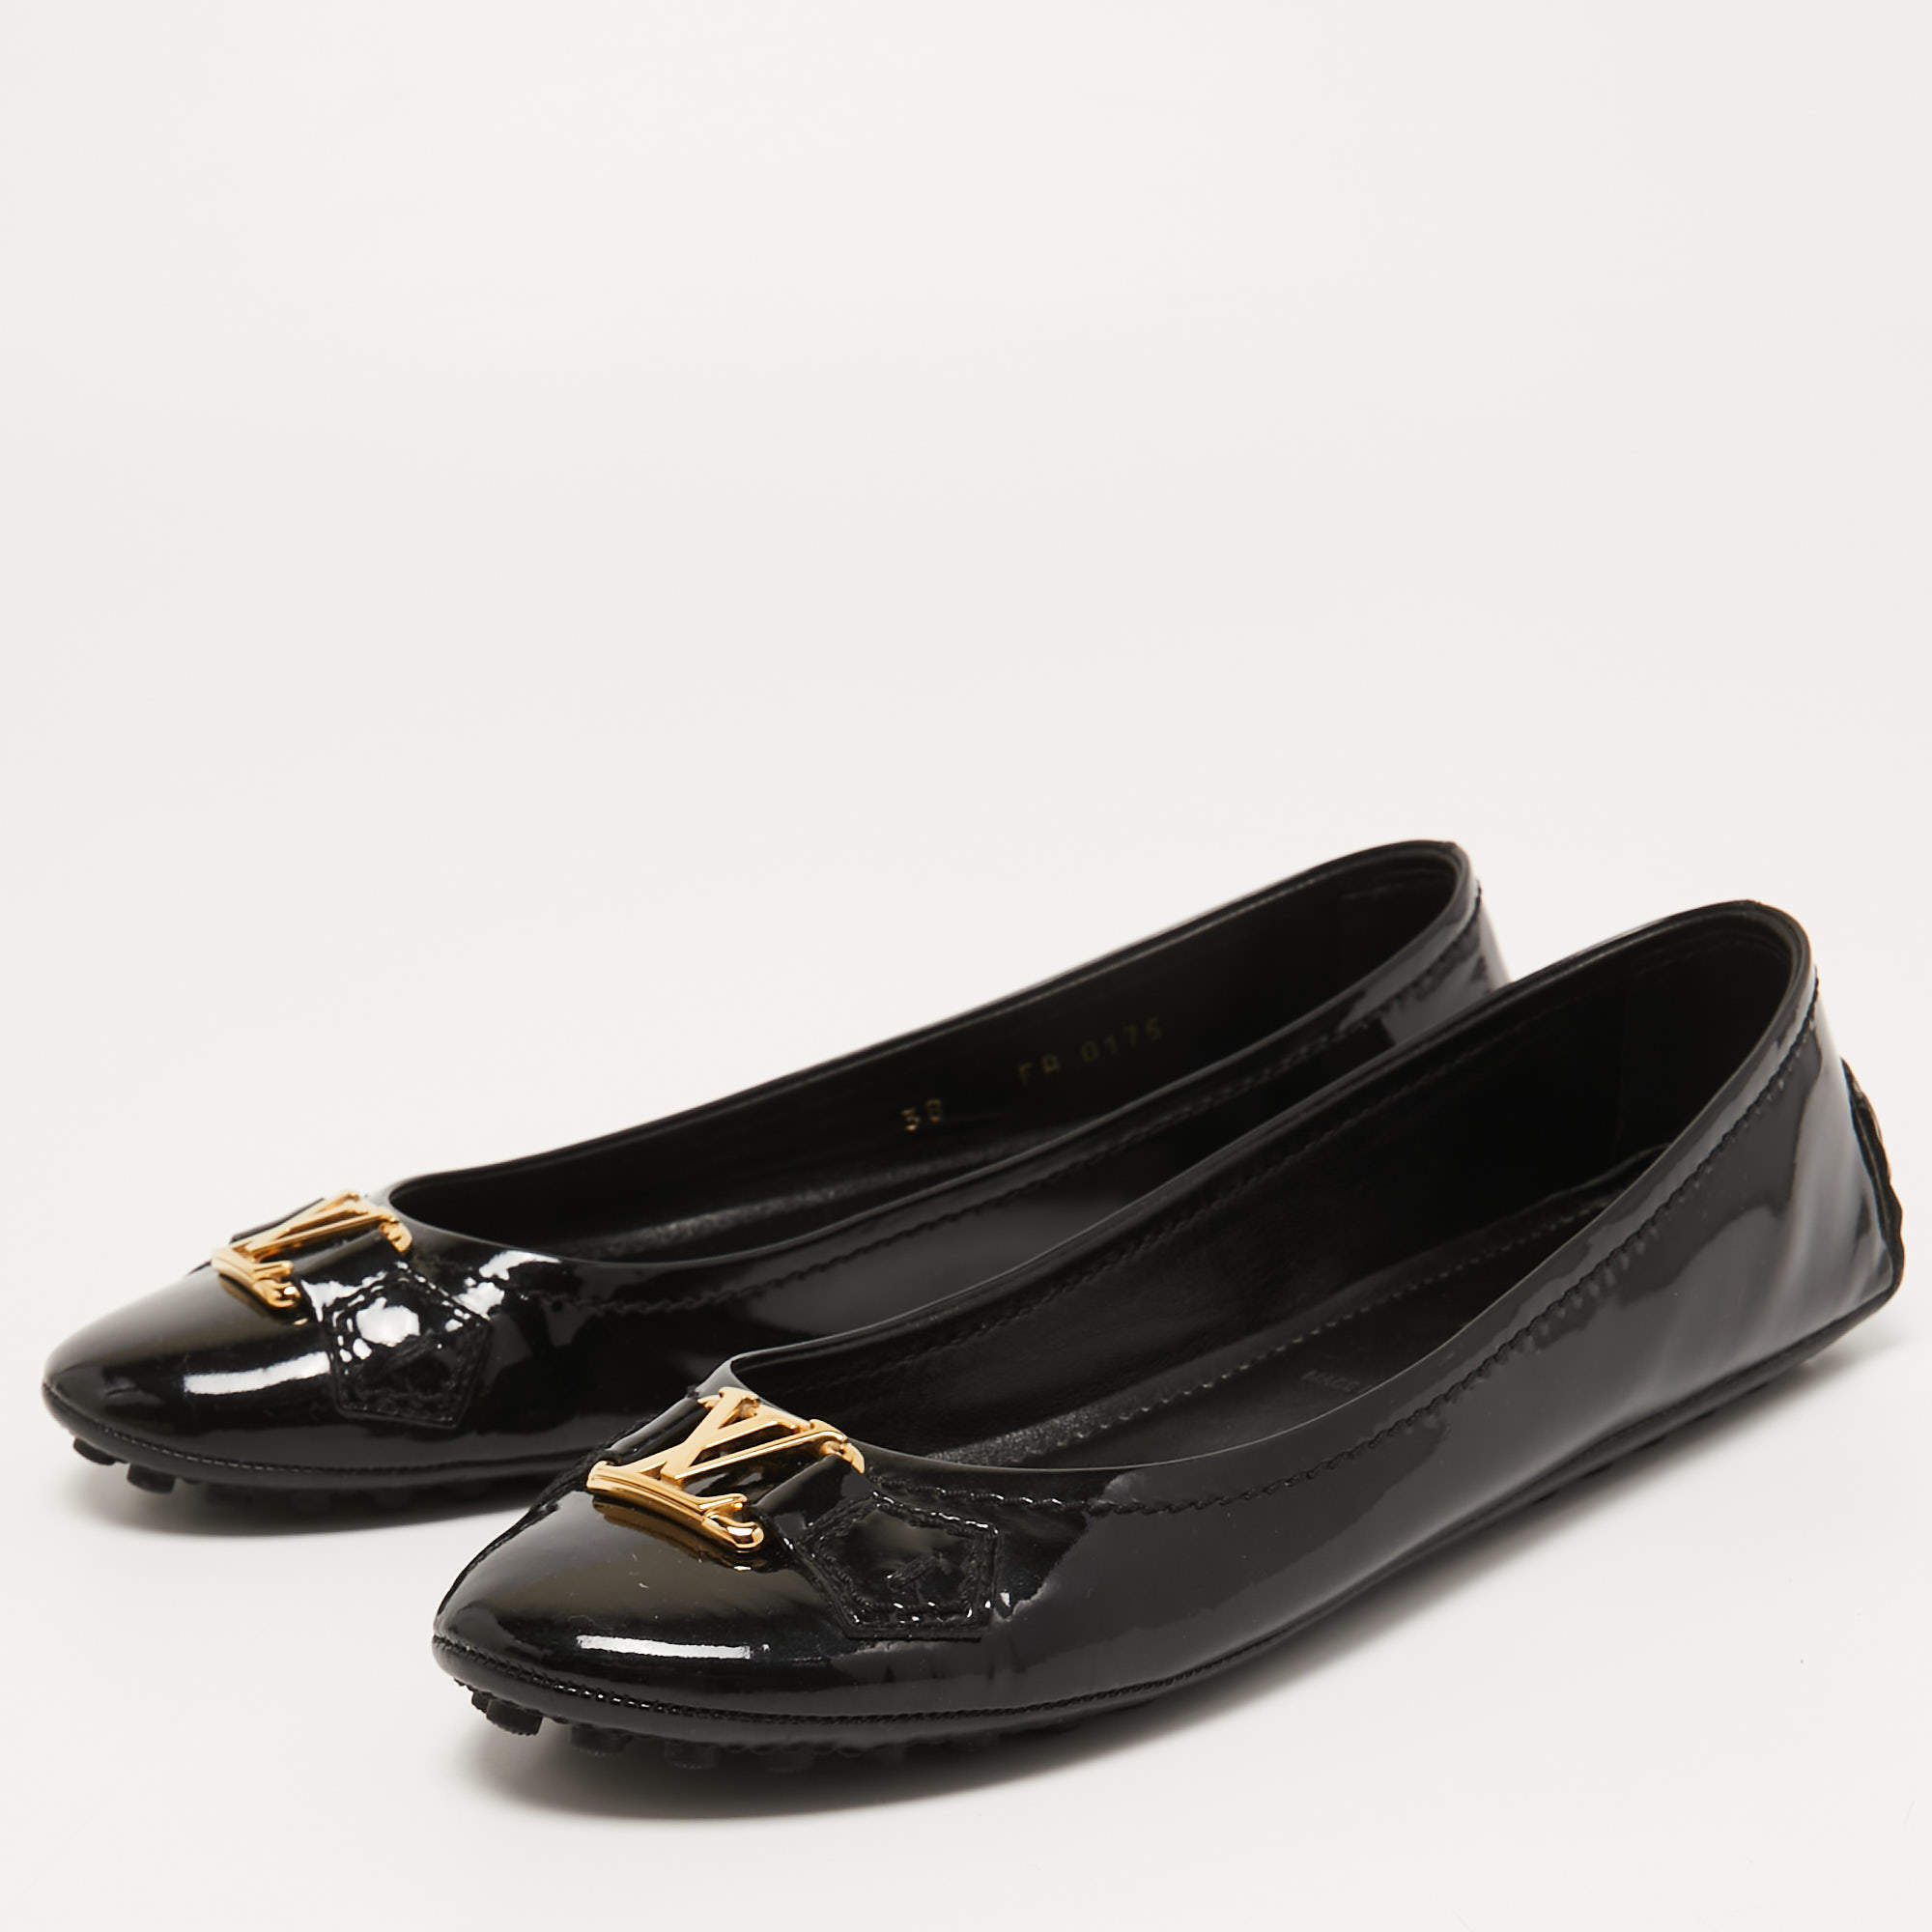 Louis Vuitton Black Patent Leather Oxford Flat Loafers Size 8/38.5